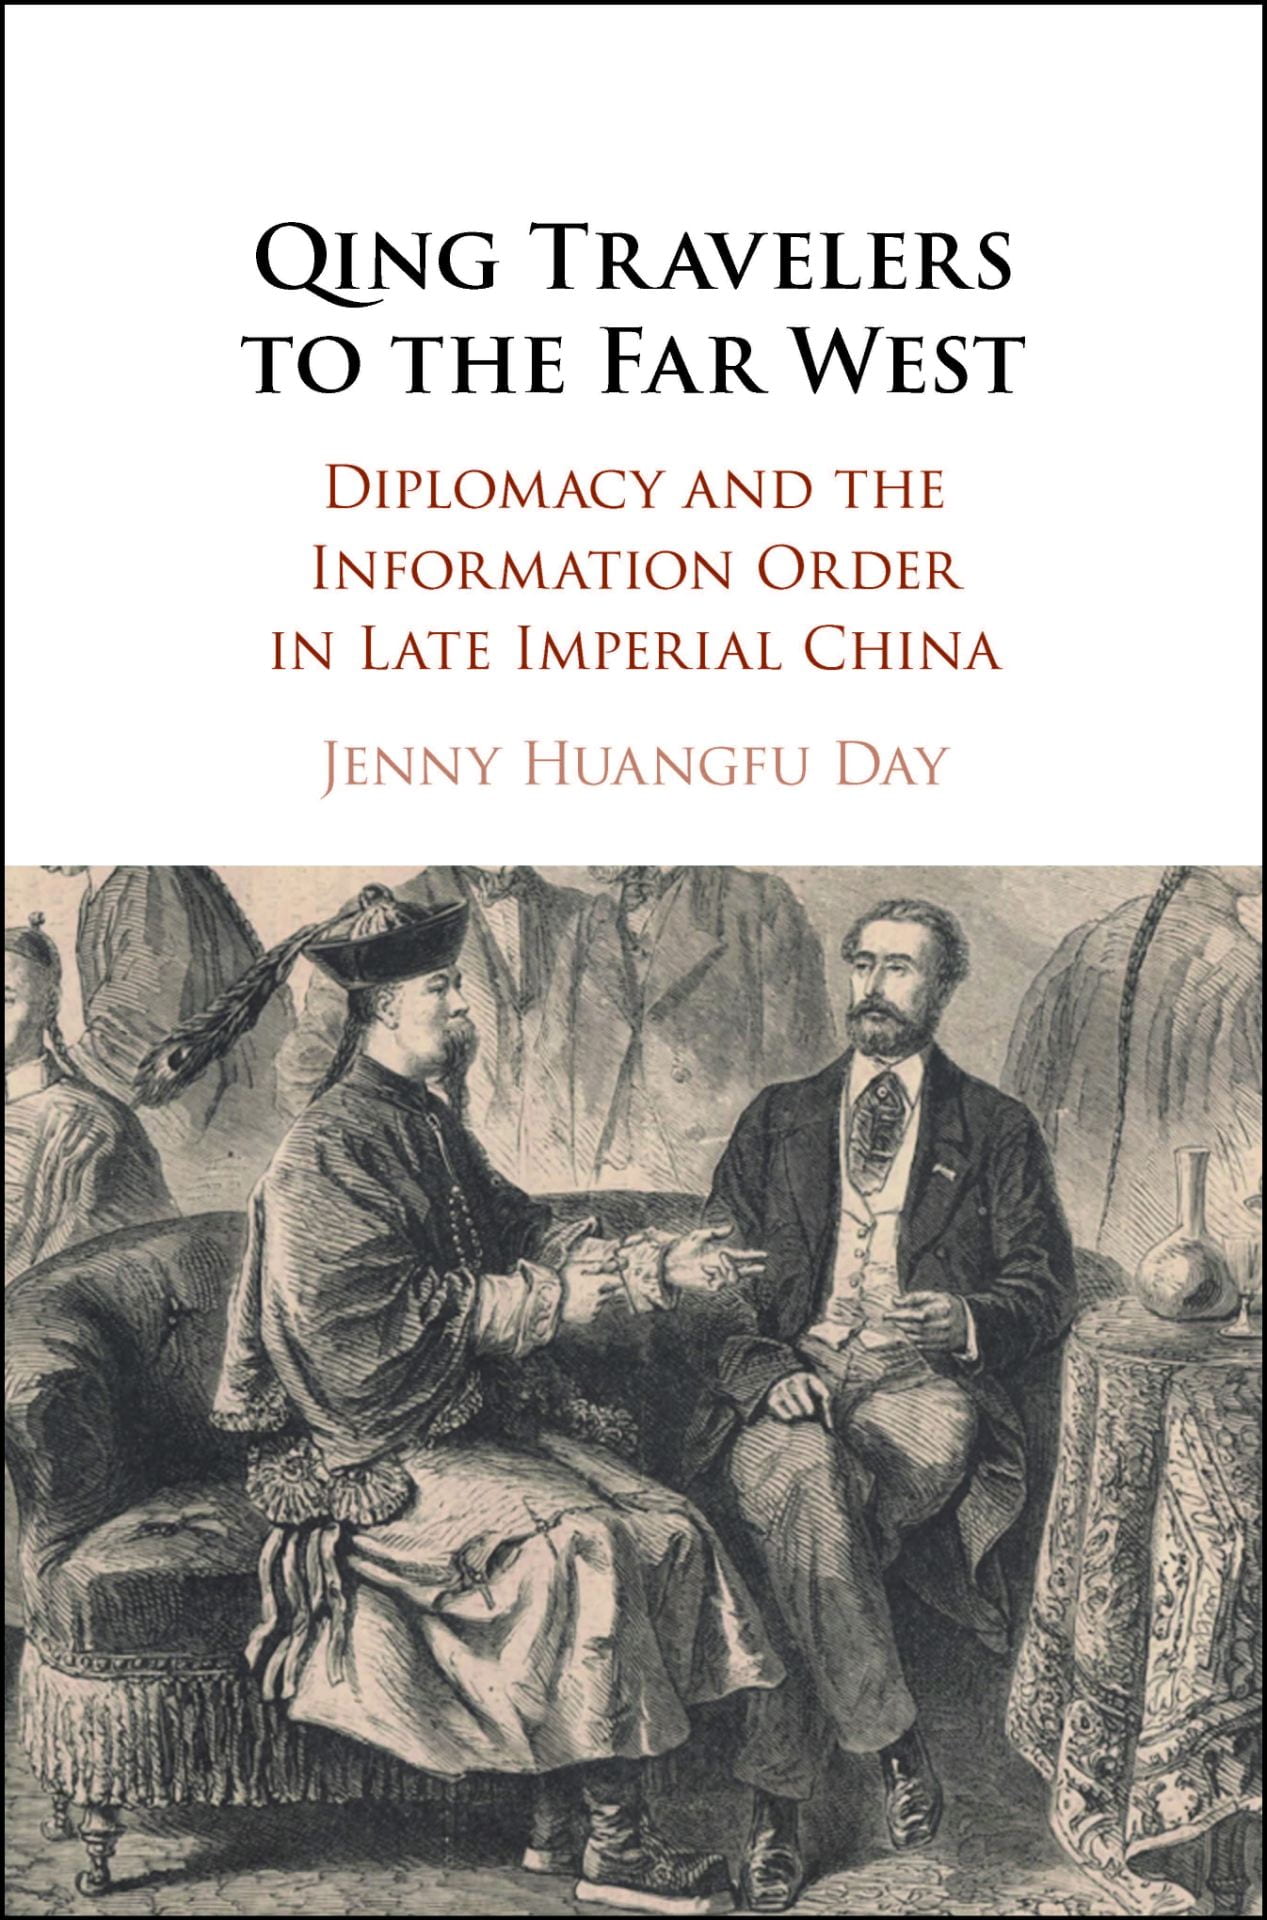 Figure 1: Cover image of 'Qing Travelers to the Far West'.